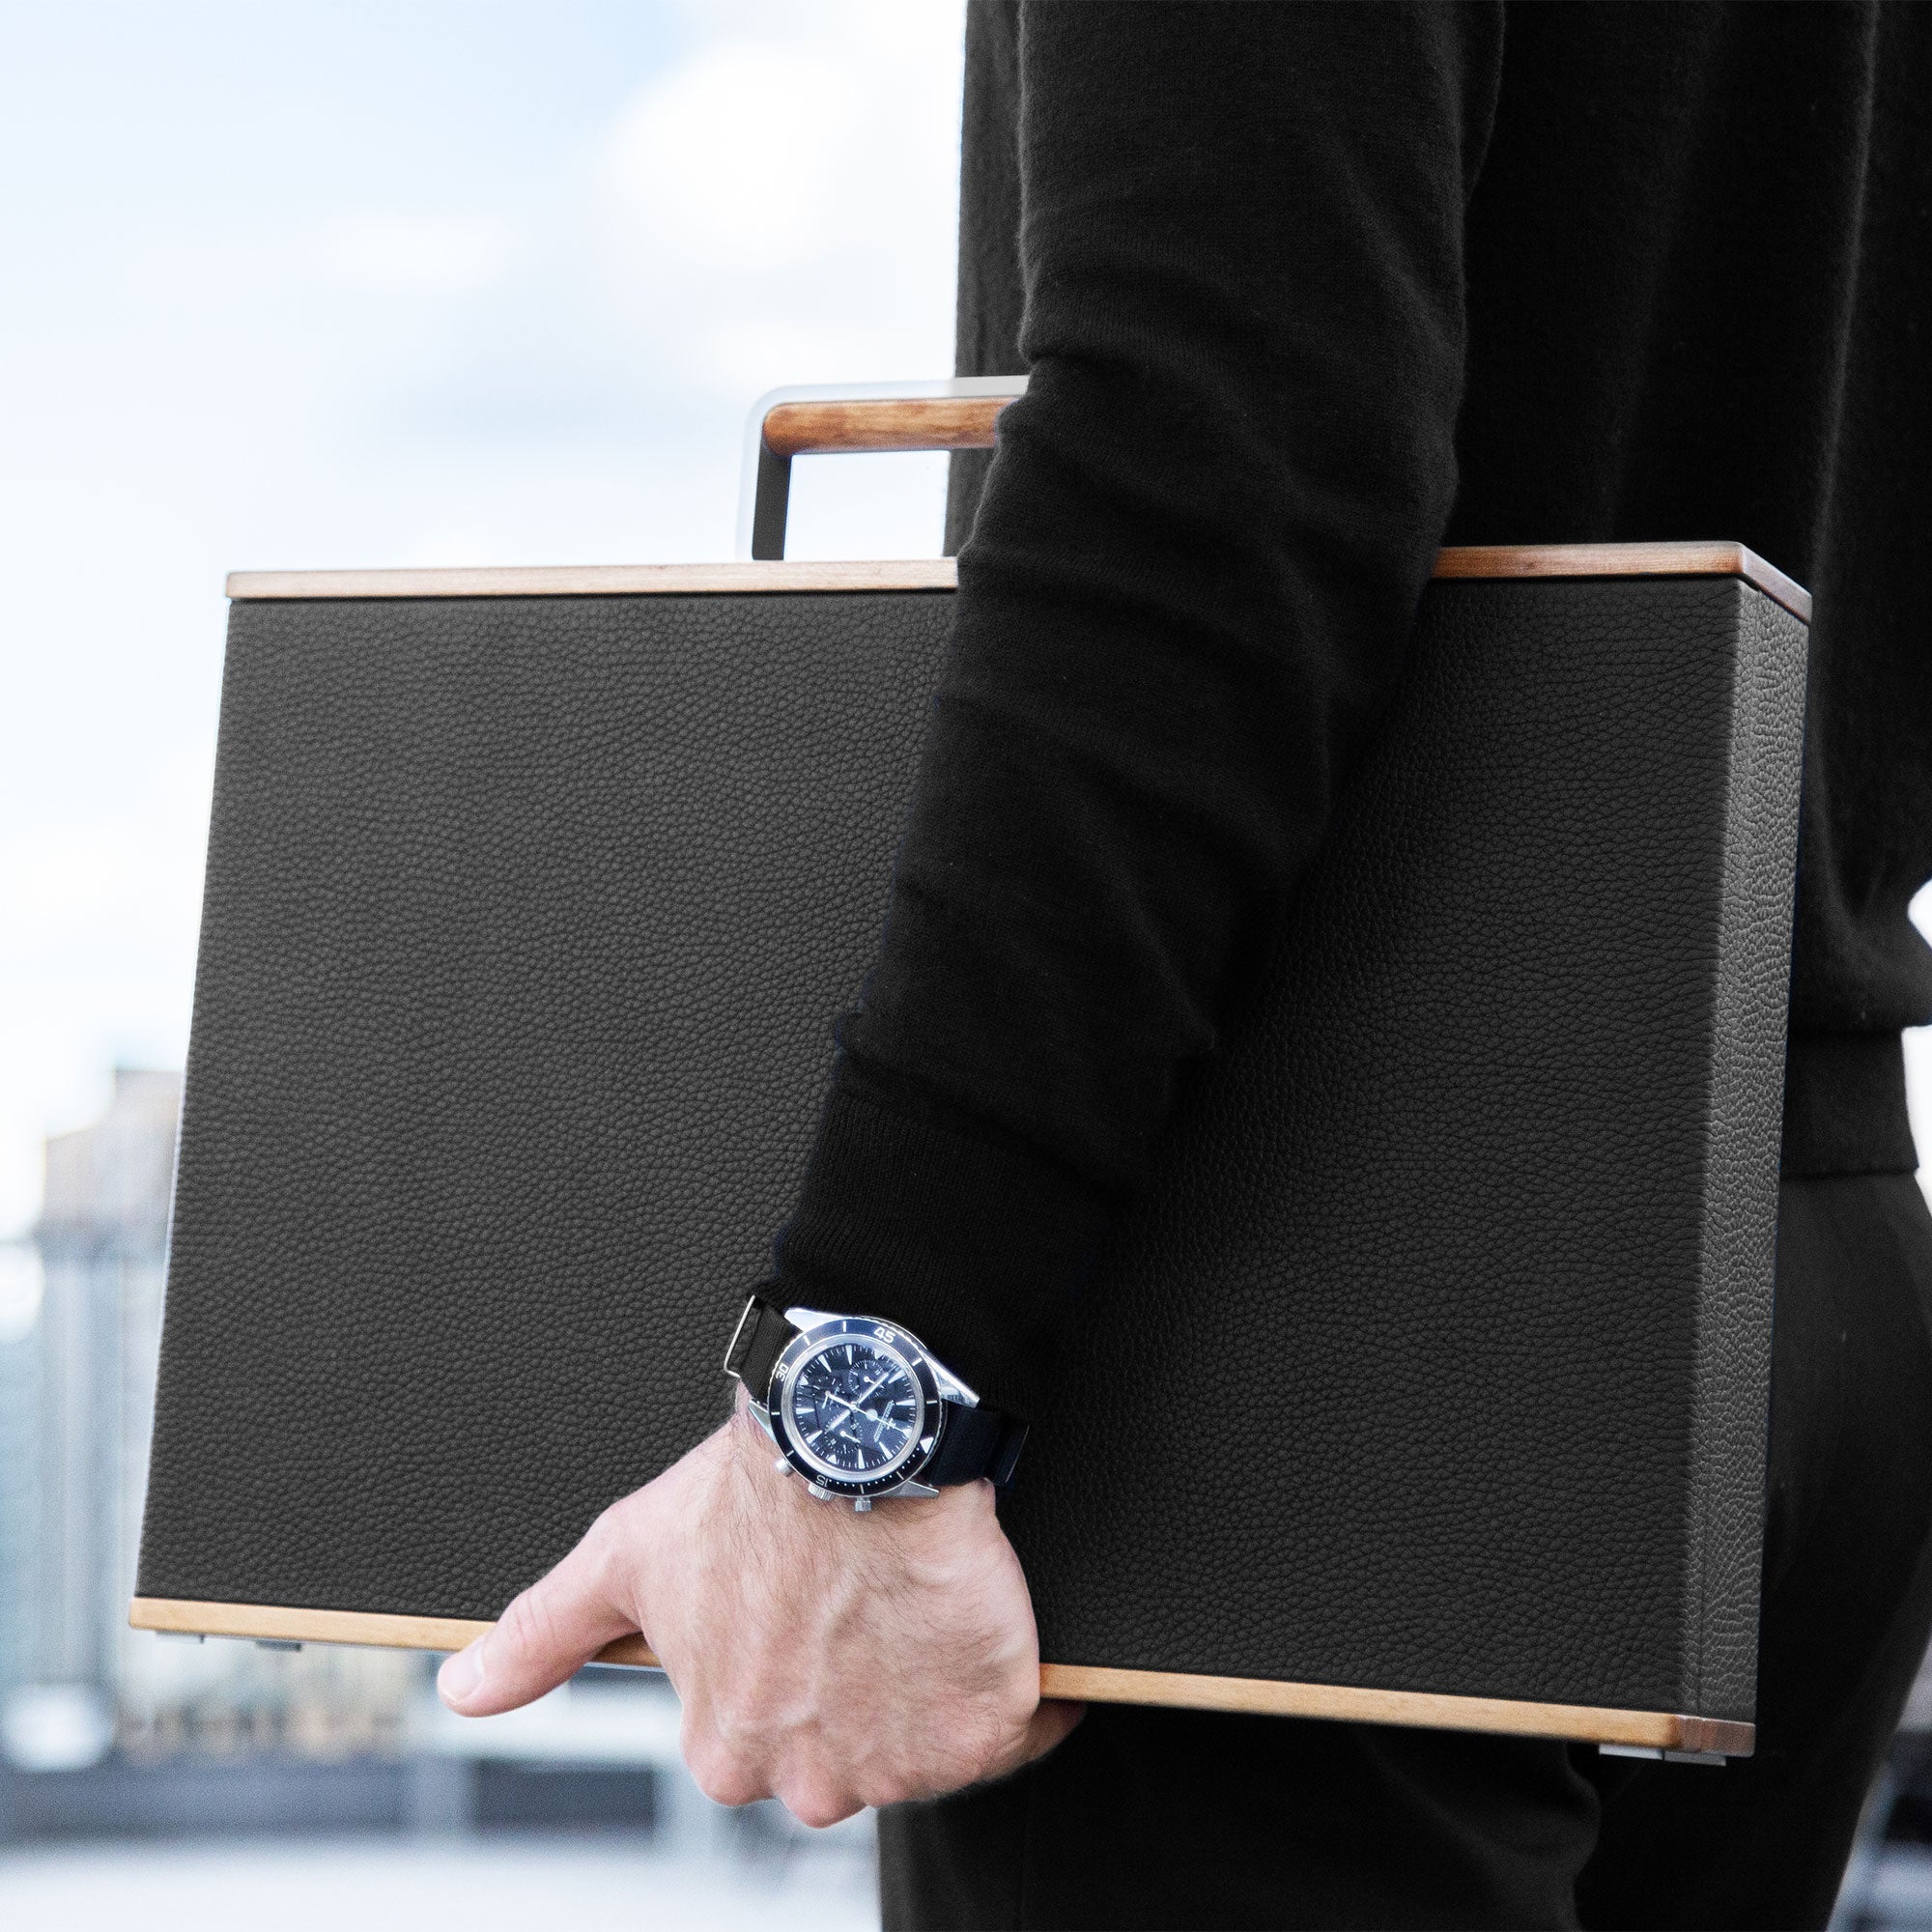 Lifestyle shot of business man wearing a Jaeger LeCoultre watch holding luxury watch briefcase by Charles Simon